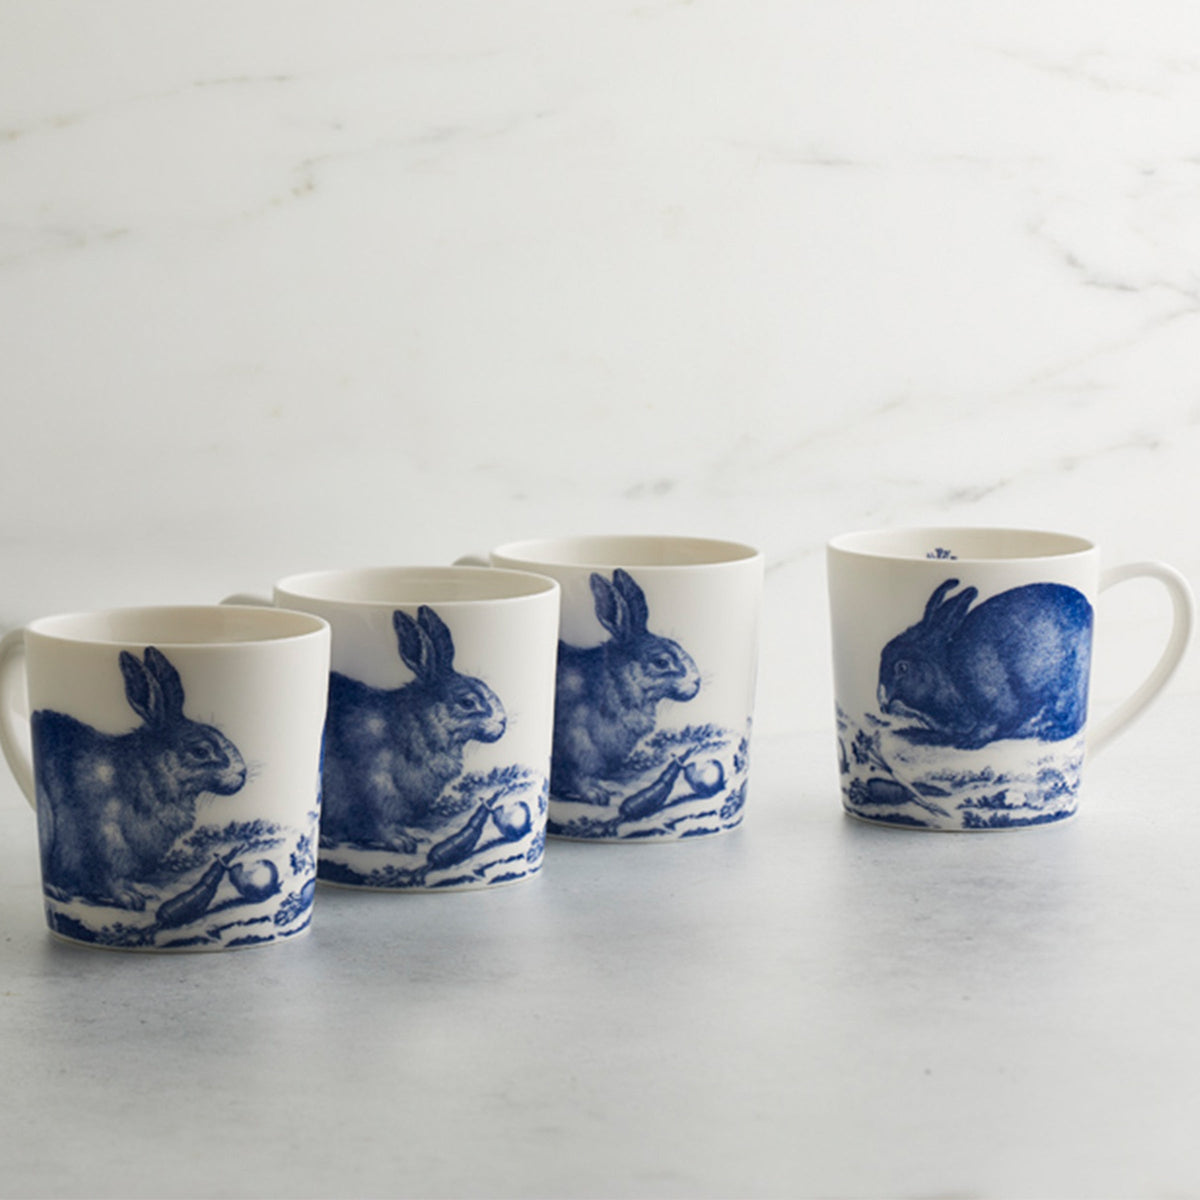 Four white high-fired porcelain Bunnies Mugs with blue illustrations of rabbits standing in a row on a light surface against a marble background, evoking a charming, Spring-inspired aesthetic from Caskata Artisanal Home.